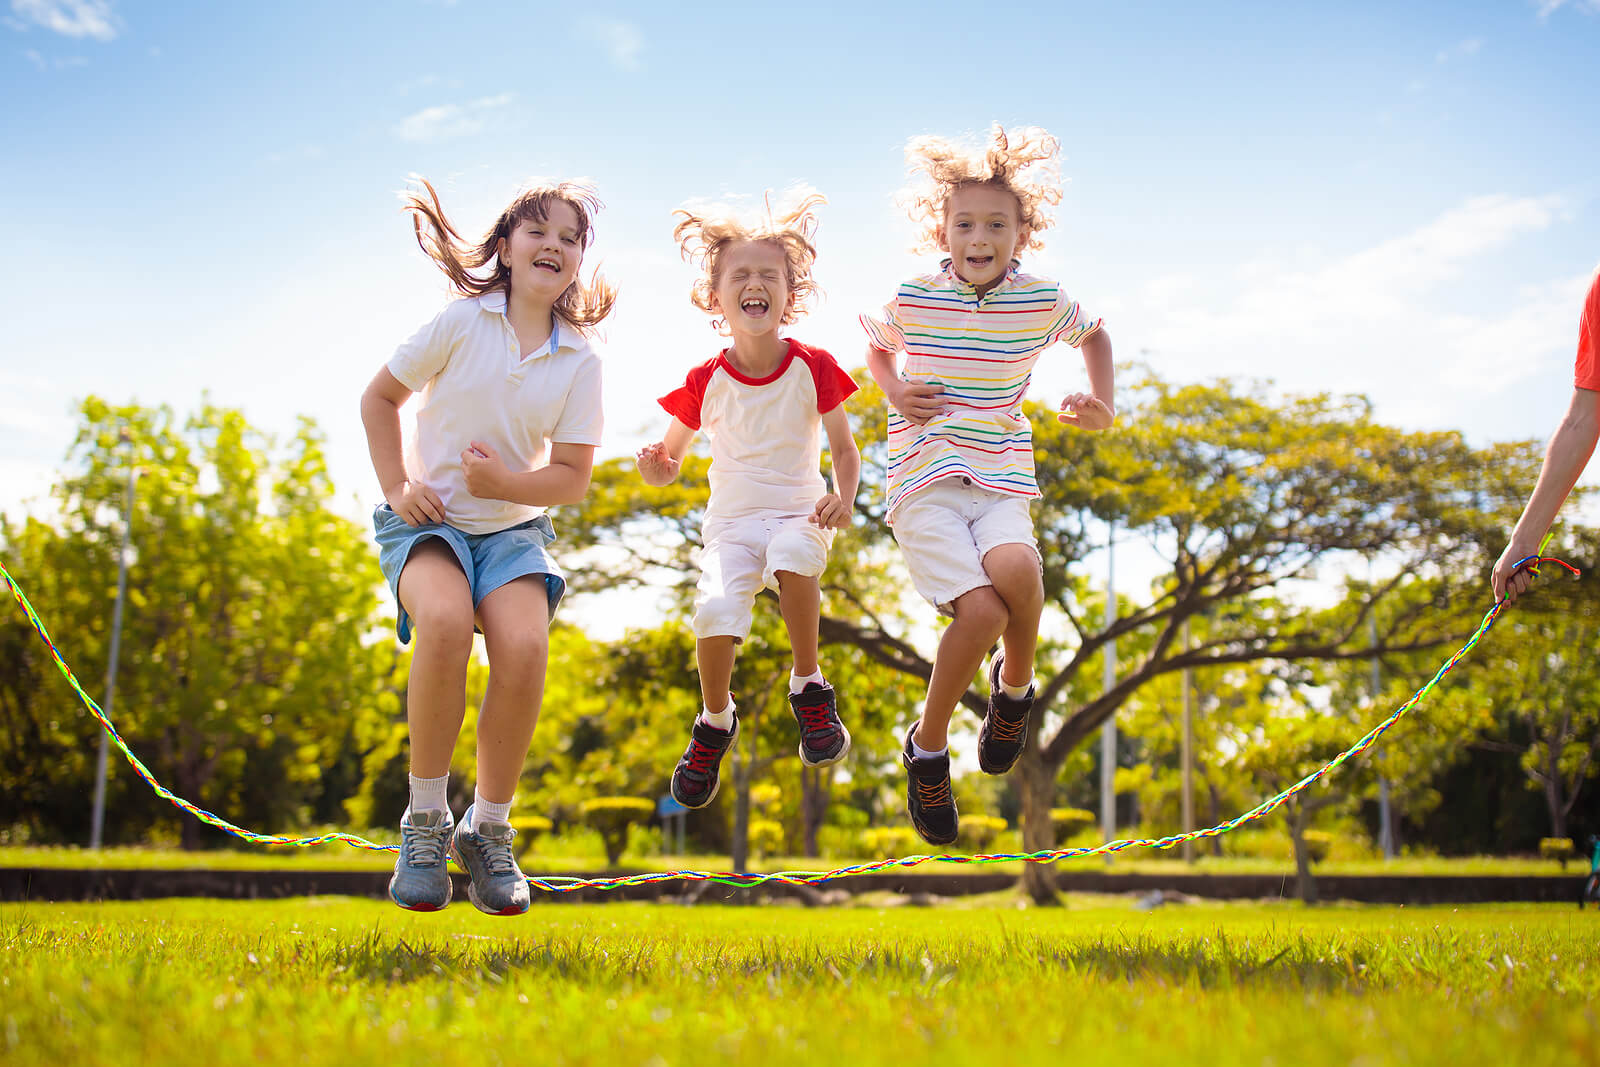 Image of three children happily jumping rope together outside. Does your child struggle academically? Learn how child neuropsych testing in Saint Petersburg, FL can help you support them.